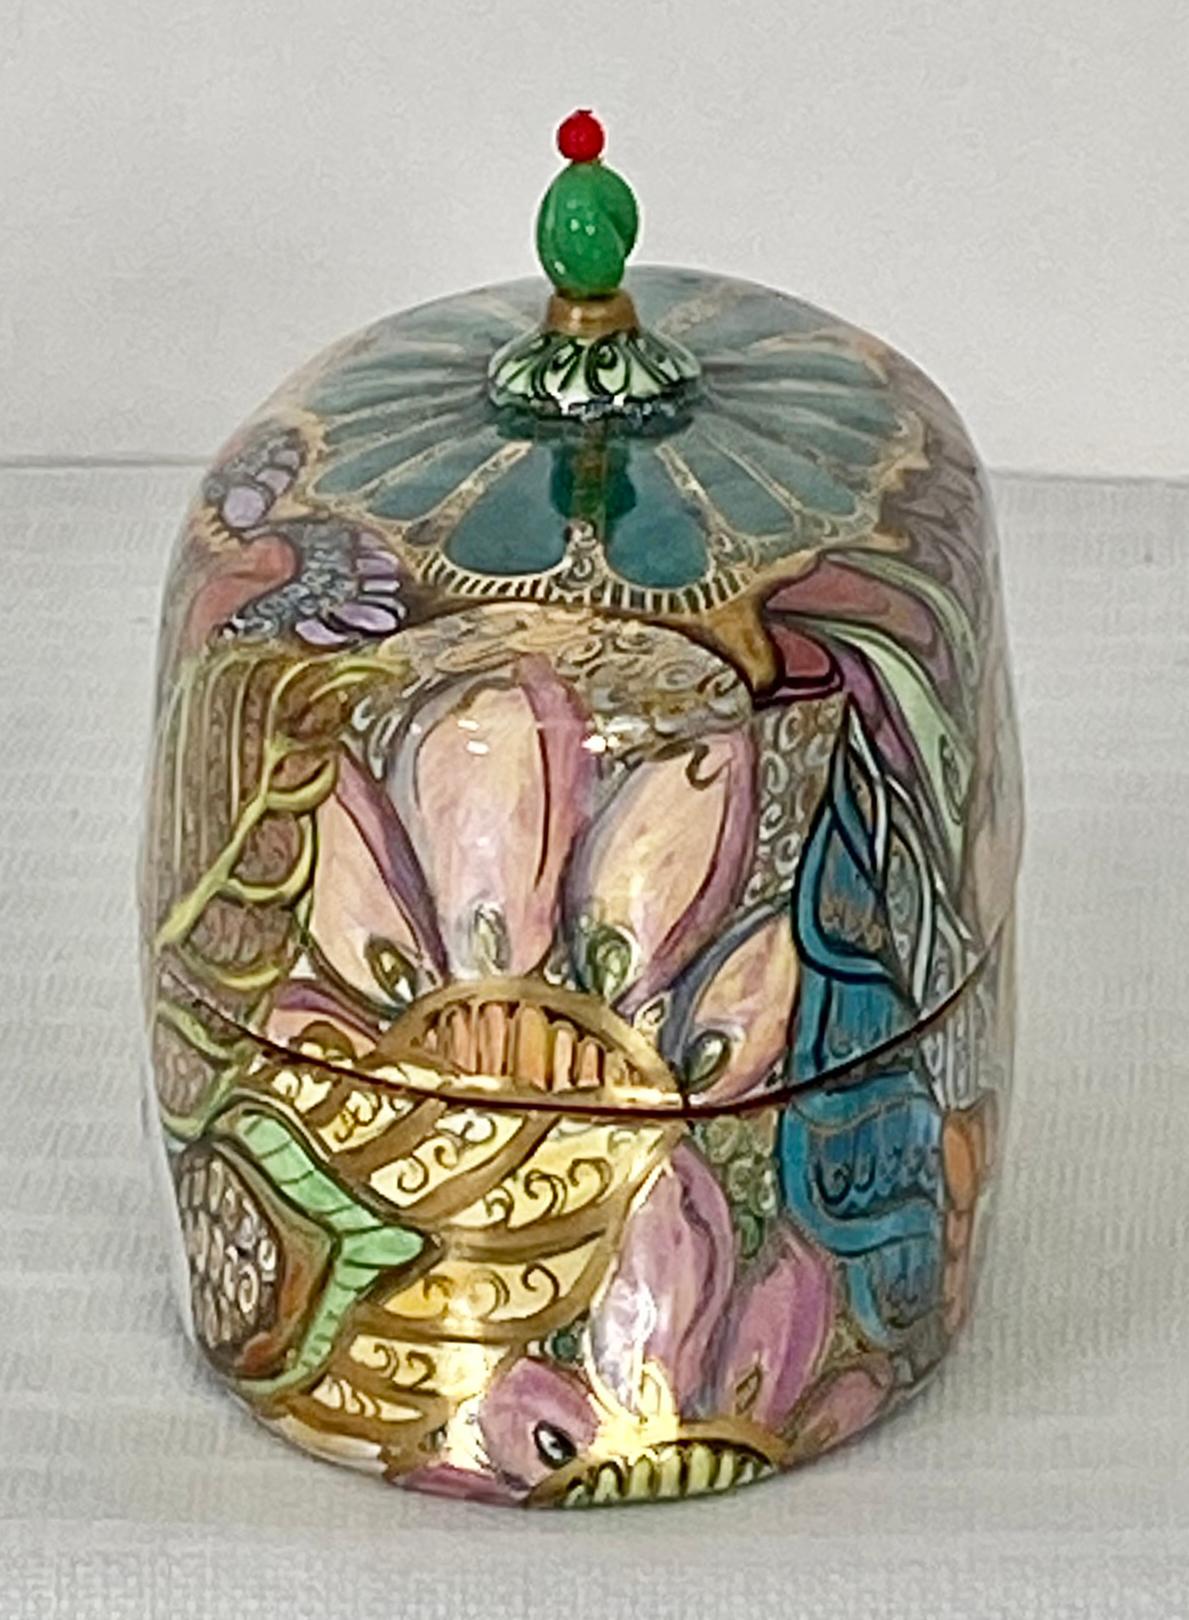 Rosalie Wynkoop Vintage Studio Art pottery tin glazed terracotta lidded box. 7.5 inches wide by 4 inches deep by 6 inches high. In very good original condition no damage.